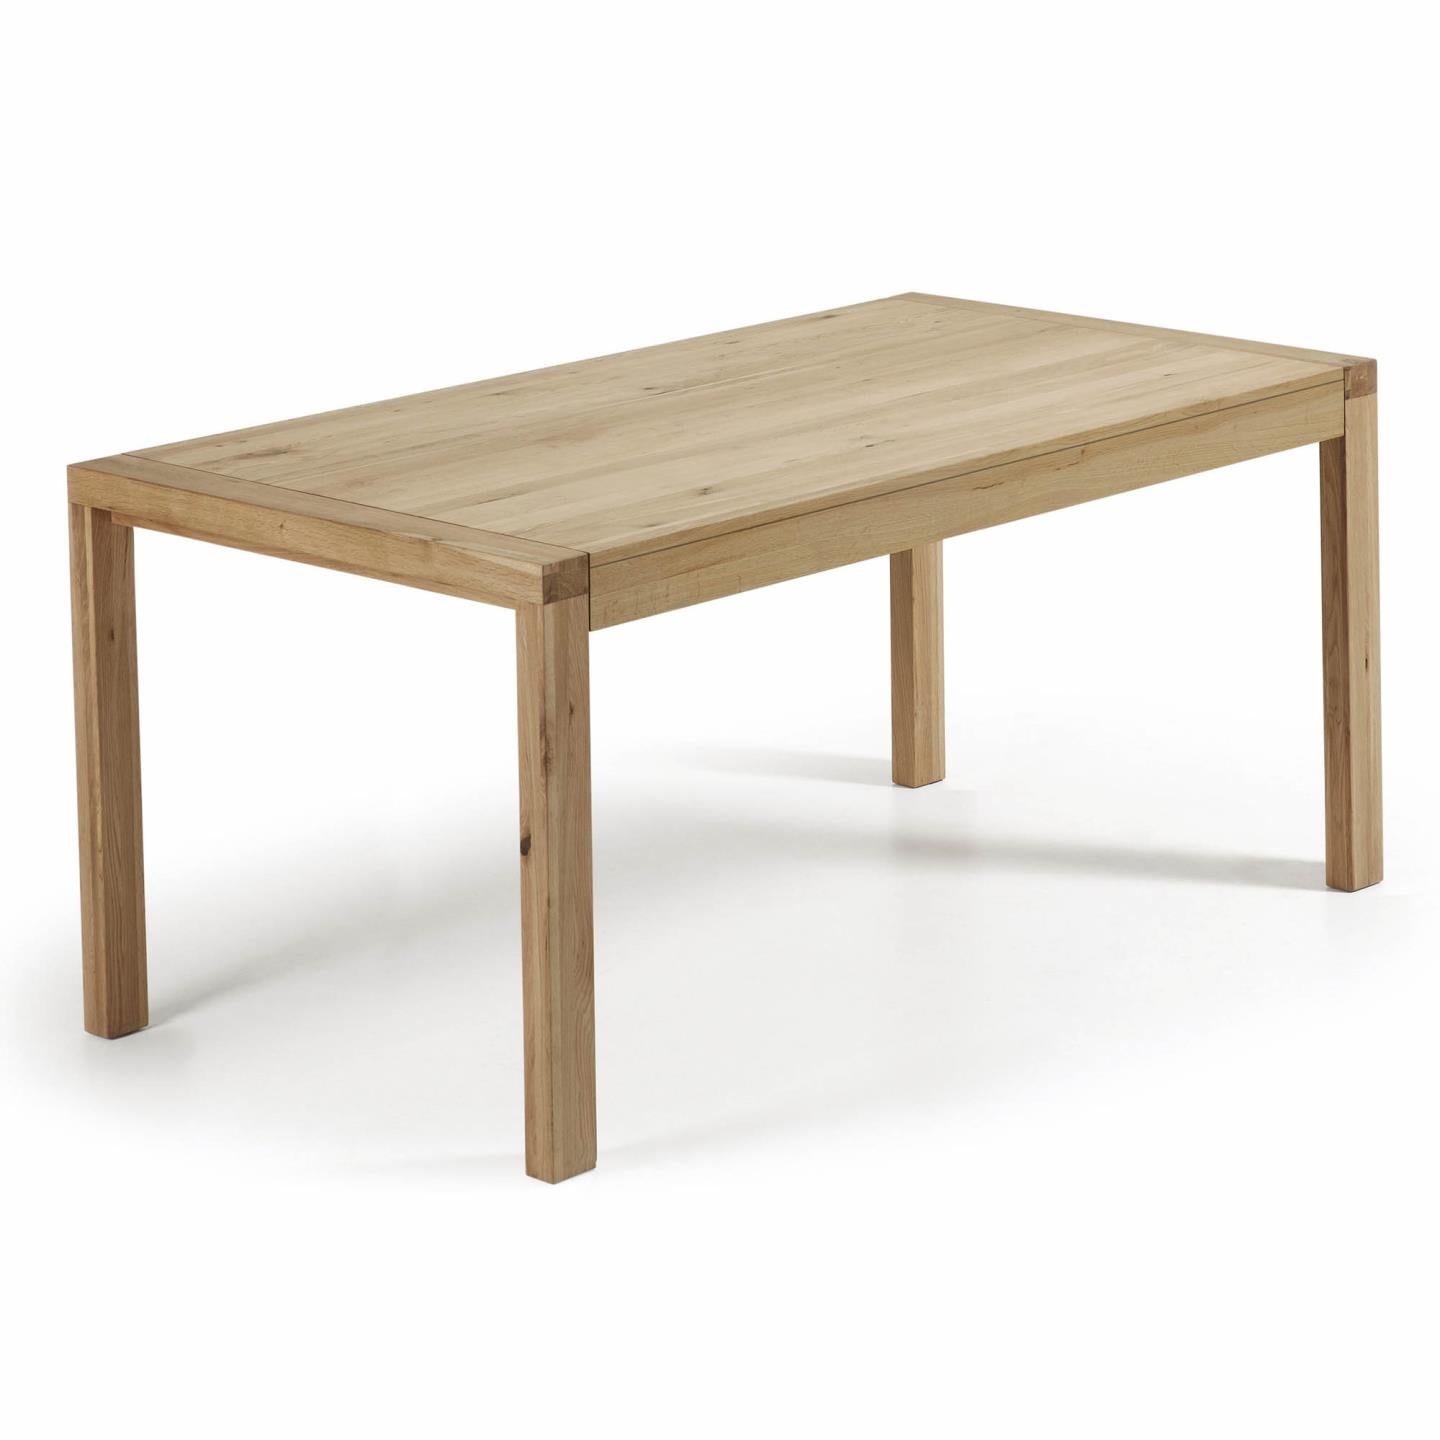 Briva extendable table with a natural oak wood finish, 180 (230) x 90 cm